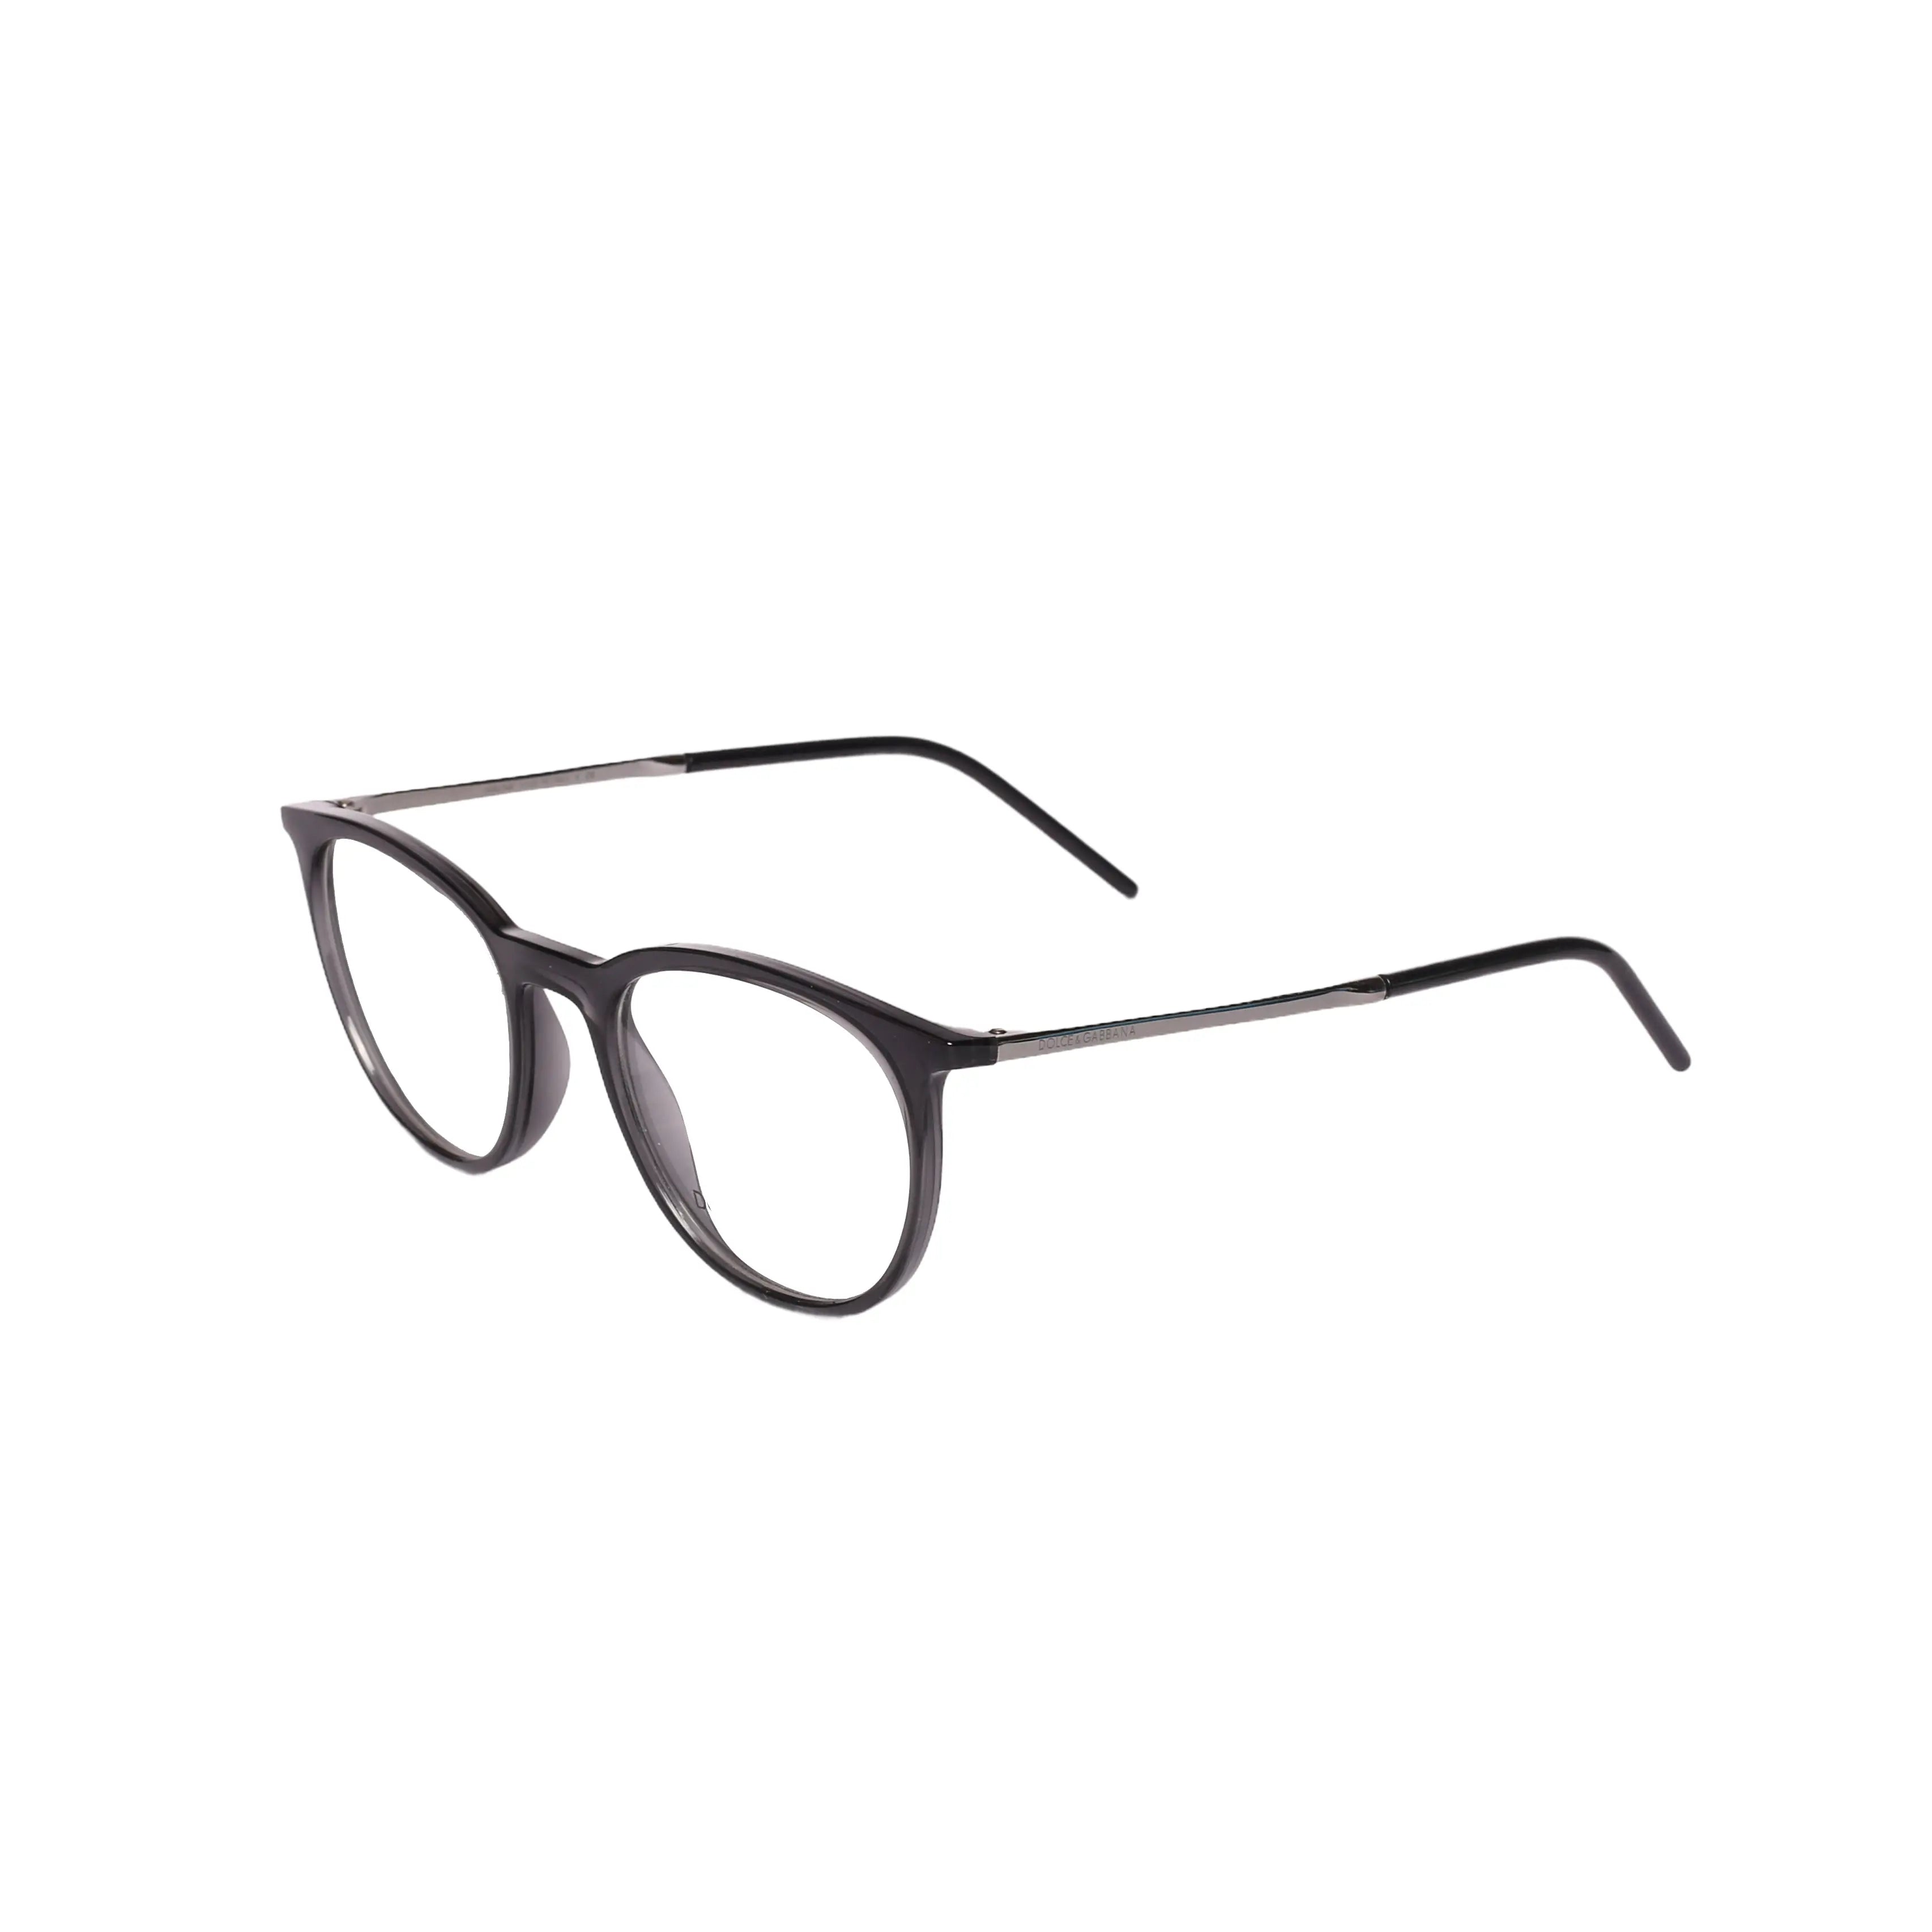 Dolce & Gabbana (D&G) DG 5074-50-3255 EyeglassesDolce &amp; Gabbana (D&amp;G) DG 5074-50-3255 Eyeglasses are the perfect combination of style and elegance. Featuring a sleek modern frame and classic color palette,Eyeglasses